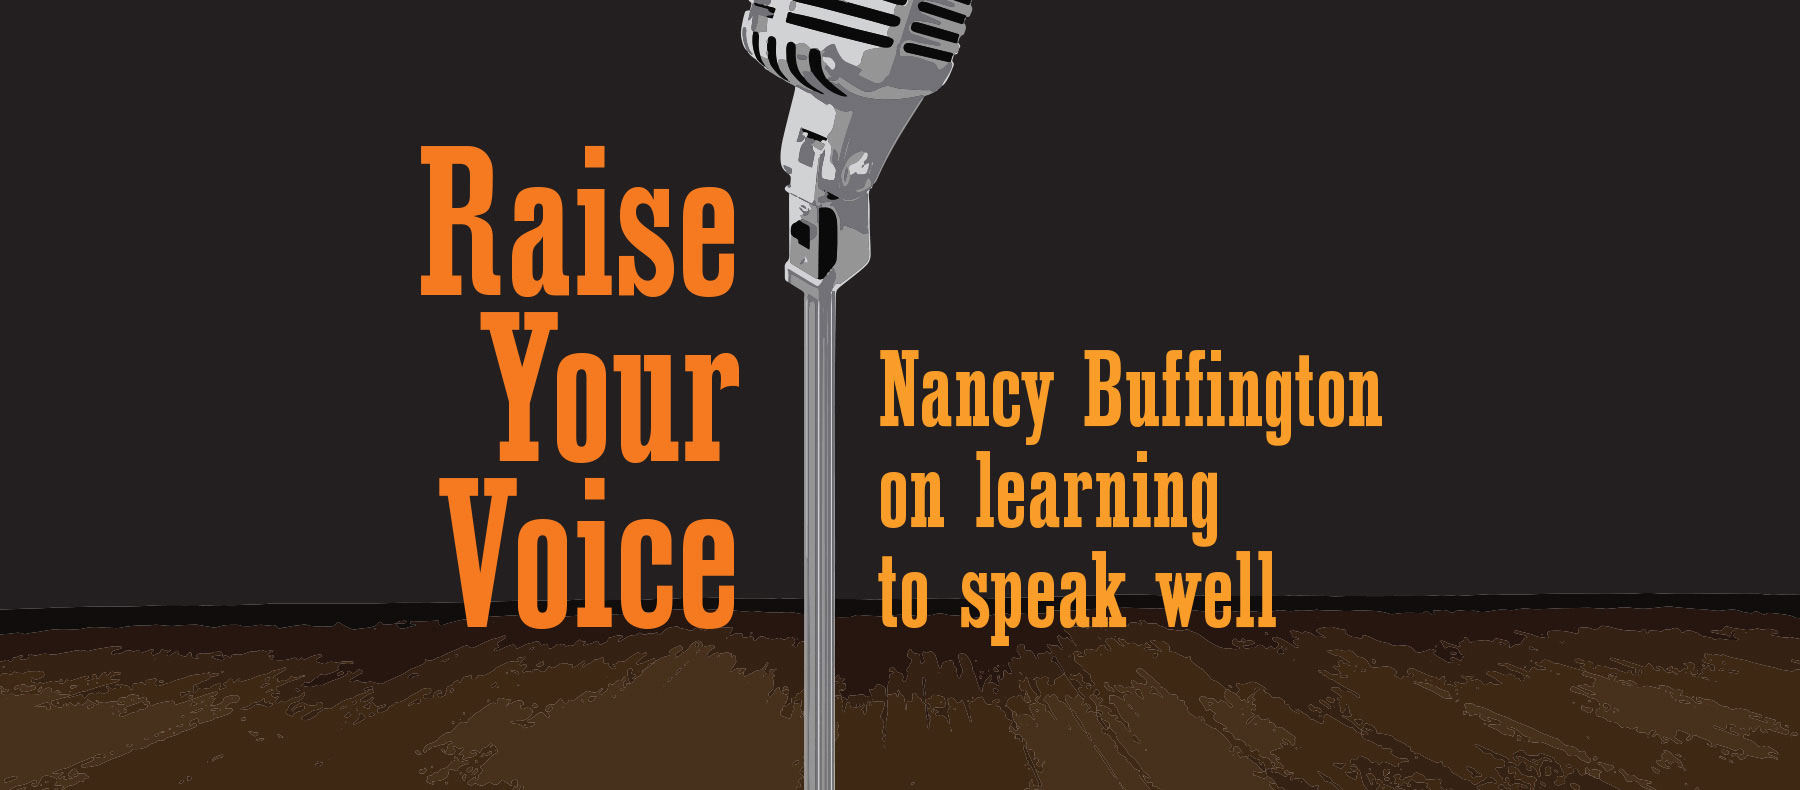 Raise Your Voice - Nacny Buffington on learning to speak well